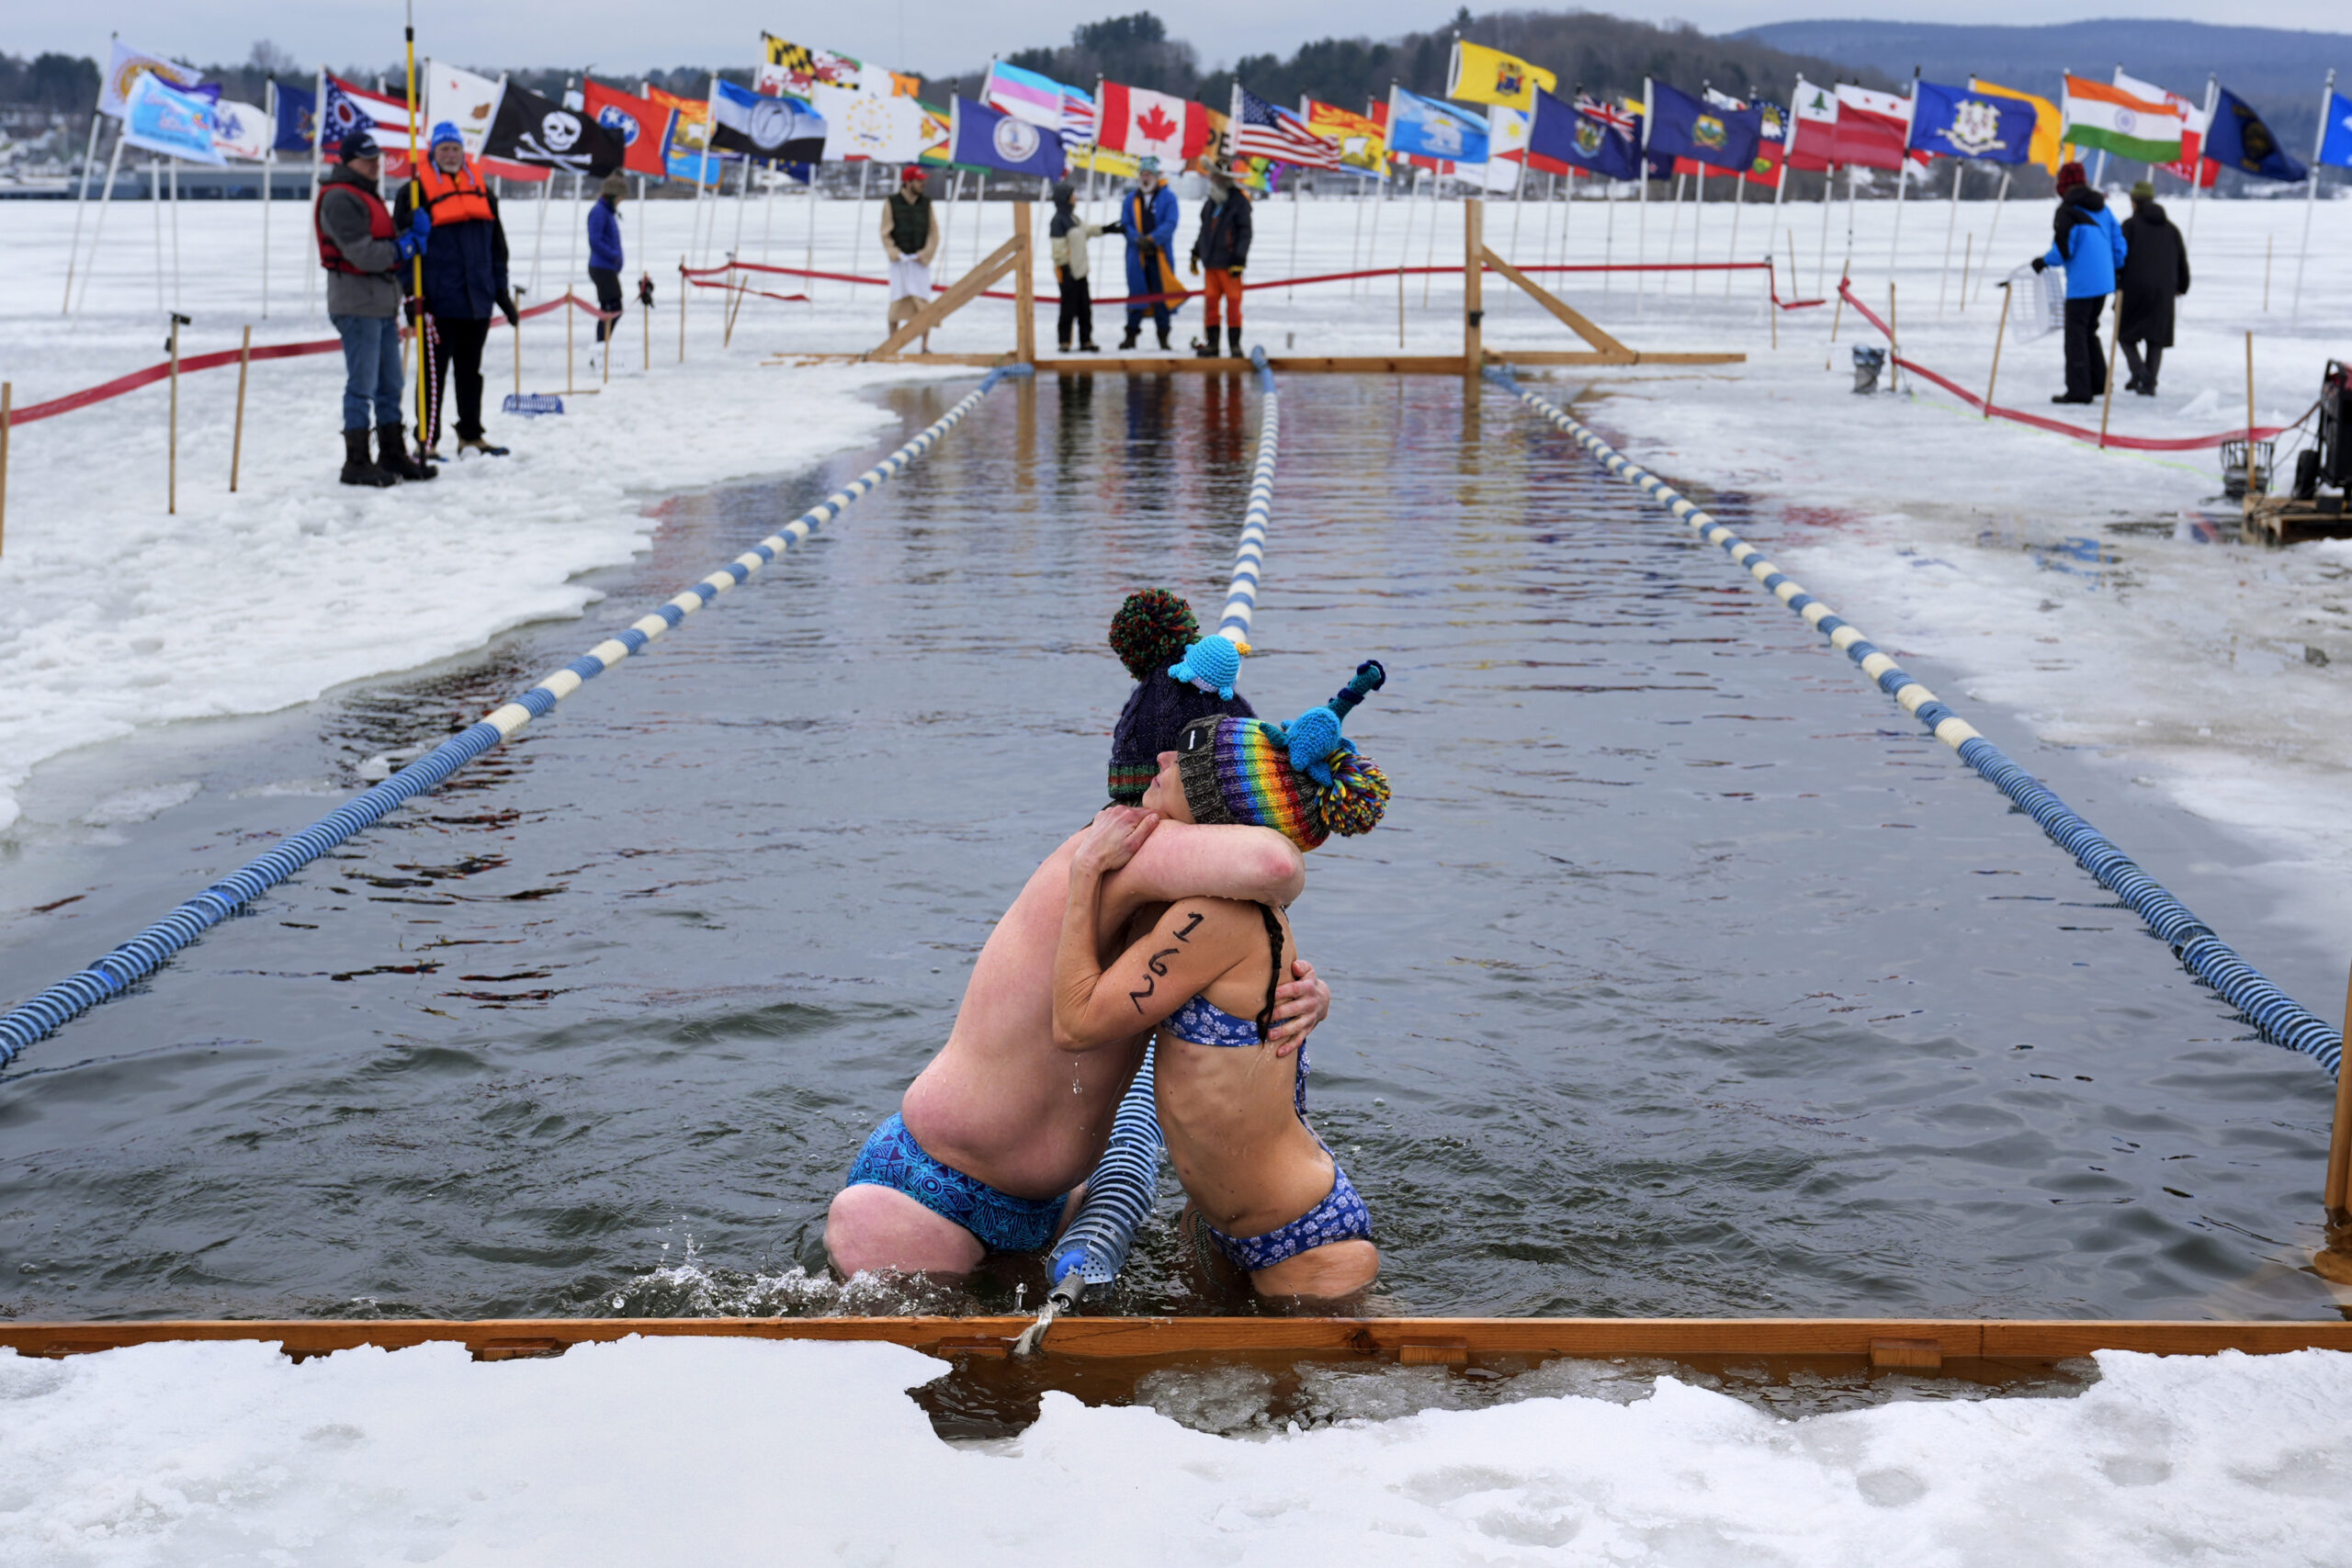 Andie Nelson, right, embraces Brian Jaskot, both of Virginia, after their race during the 25 meter ...